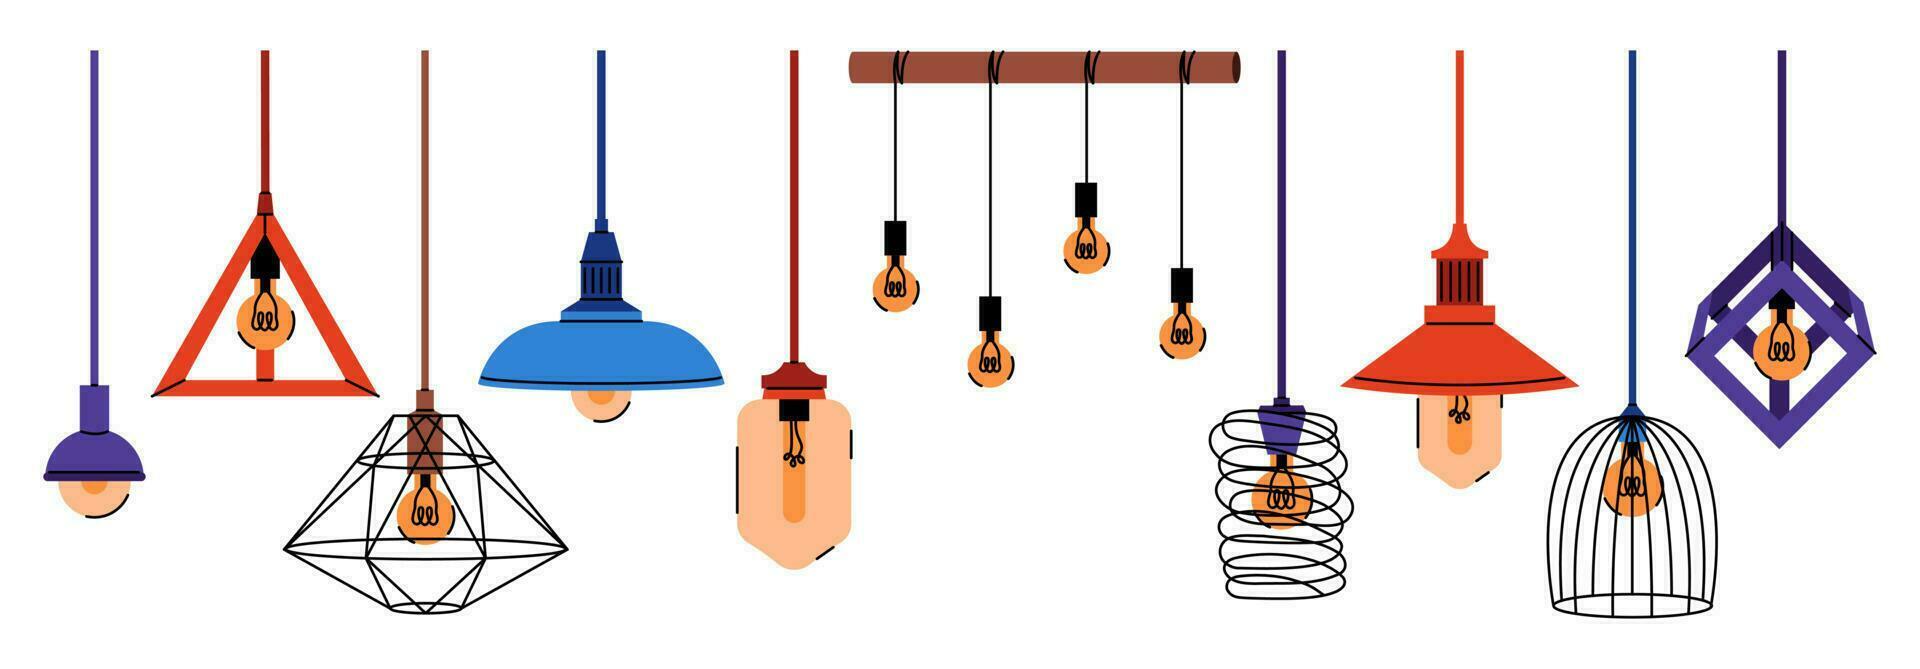 Collection of different chandelier lamps. Flat vector illustration on white background.